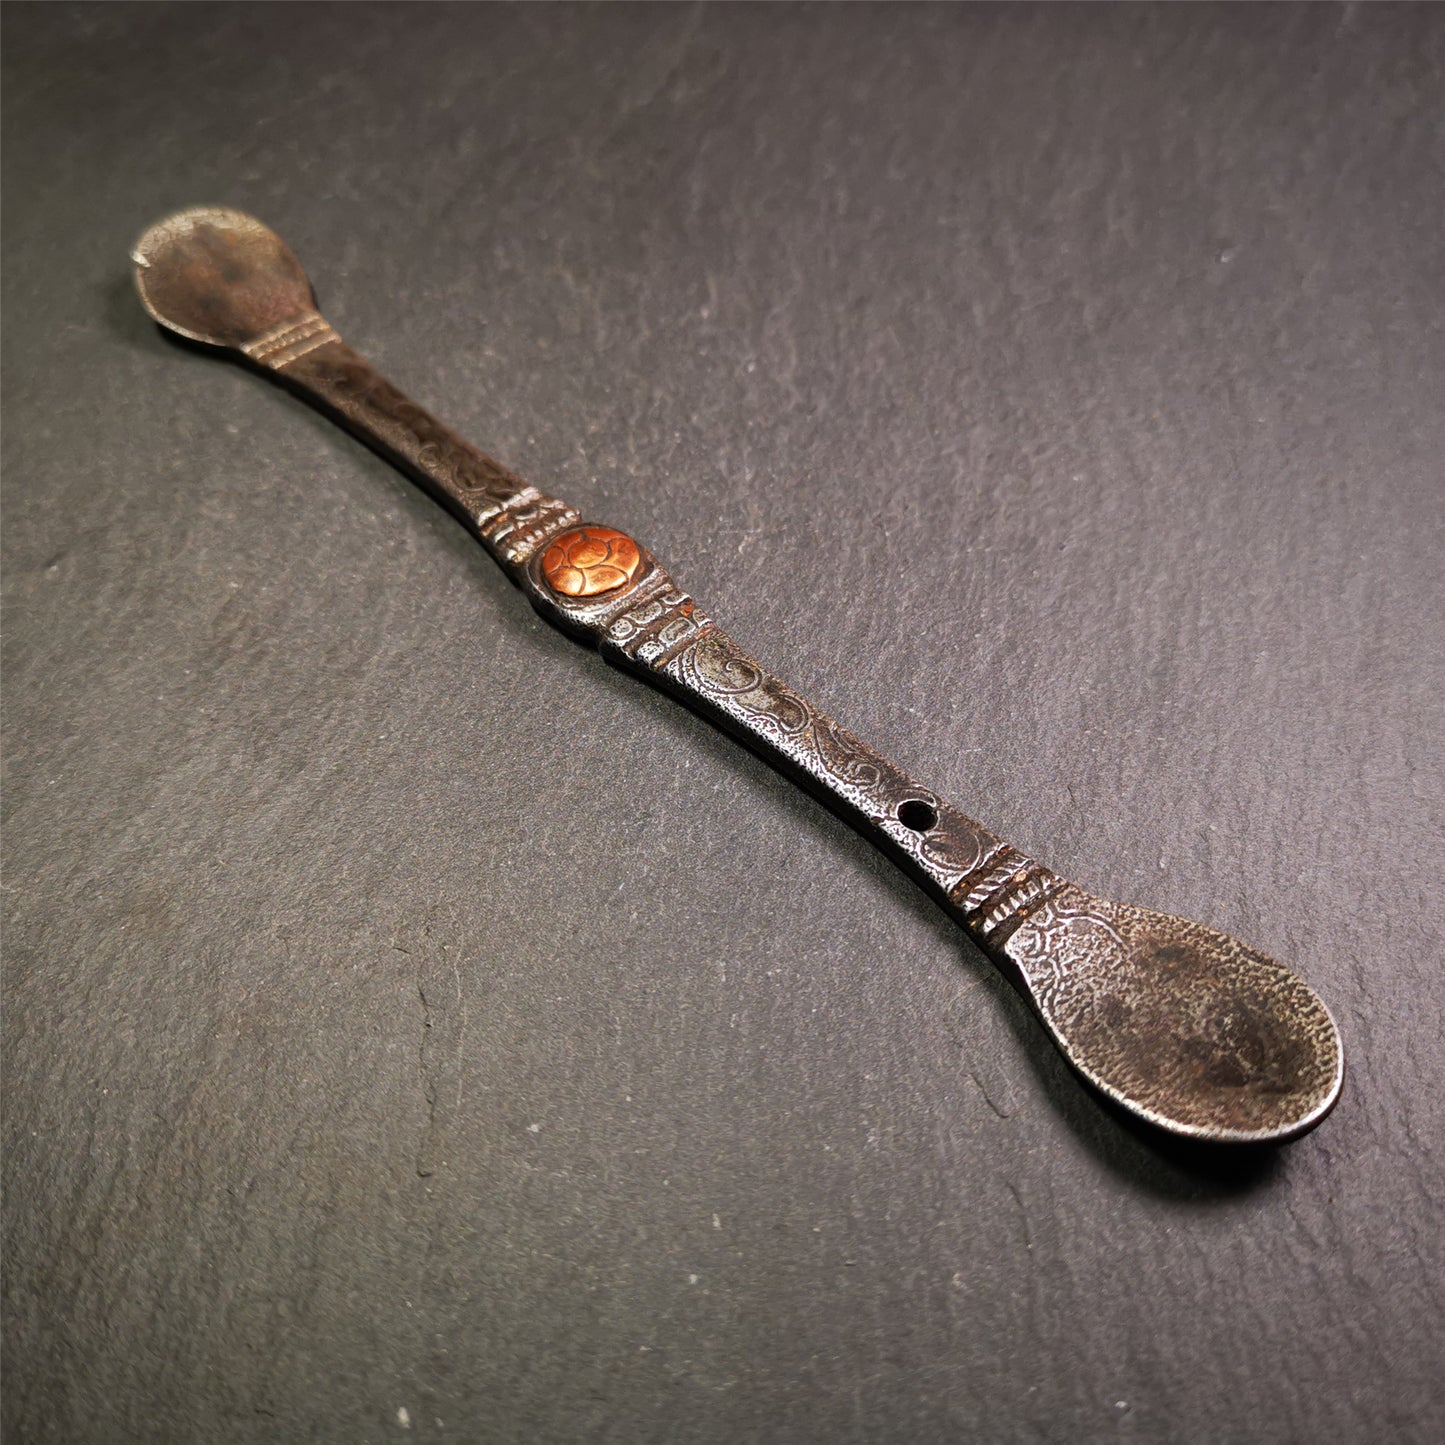 This offering spoon is handmade by Tibetan craftsmen from Hepo Town, Baiyu County,the birthplace of the famous Tibetan handicrafts. It is entirely hand-carved with cold iron and copper,lenght about 7.5 inches. You can see teh intricate engraved detail along the handle, neck and bowl,very beautiful. Religious dharma tool used in Buddhist shrine.